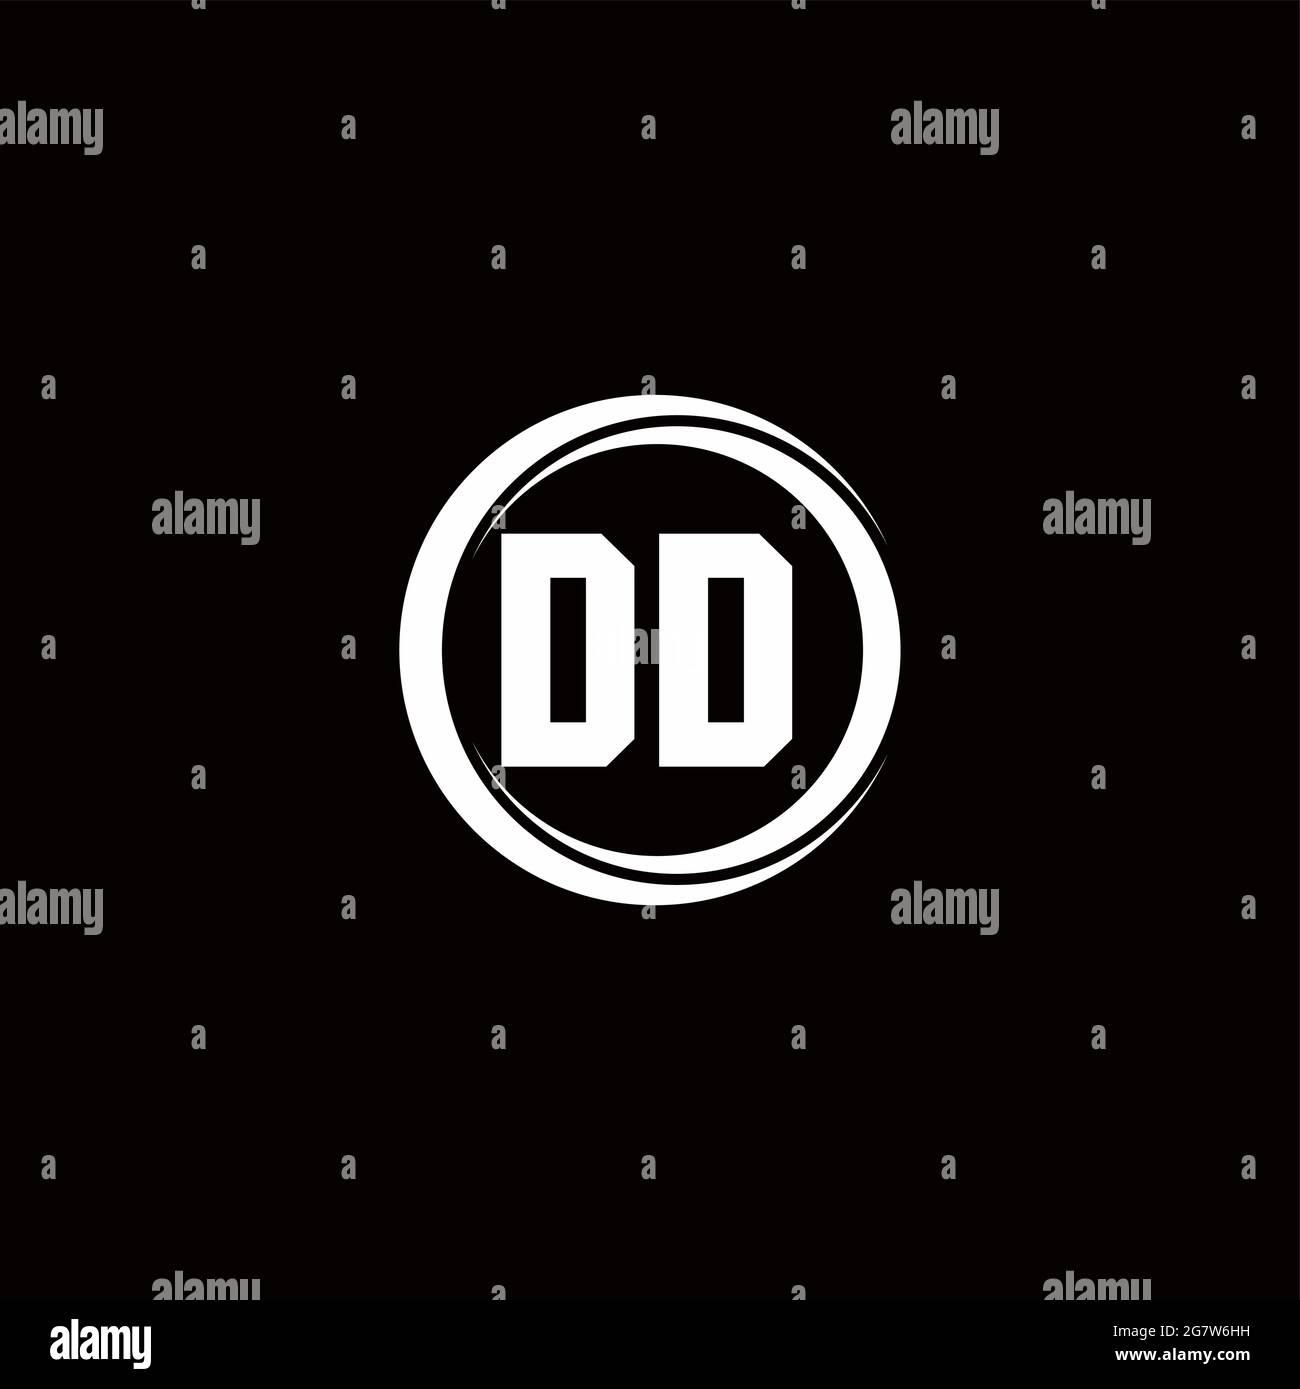 Dd Logo Initial Letter Monogram With Circle Slice Rounded Design Template Isolated In Black